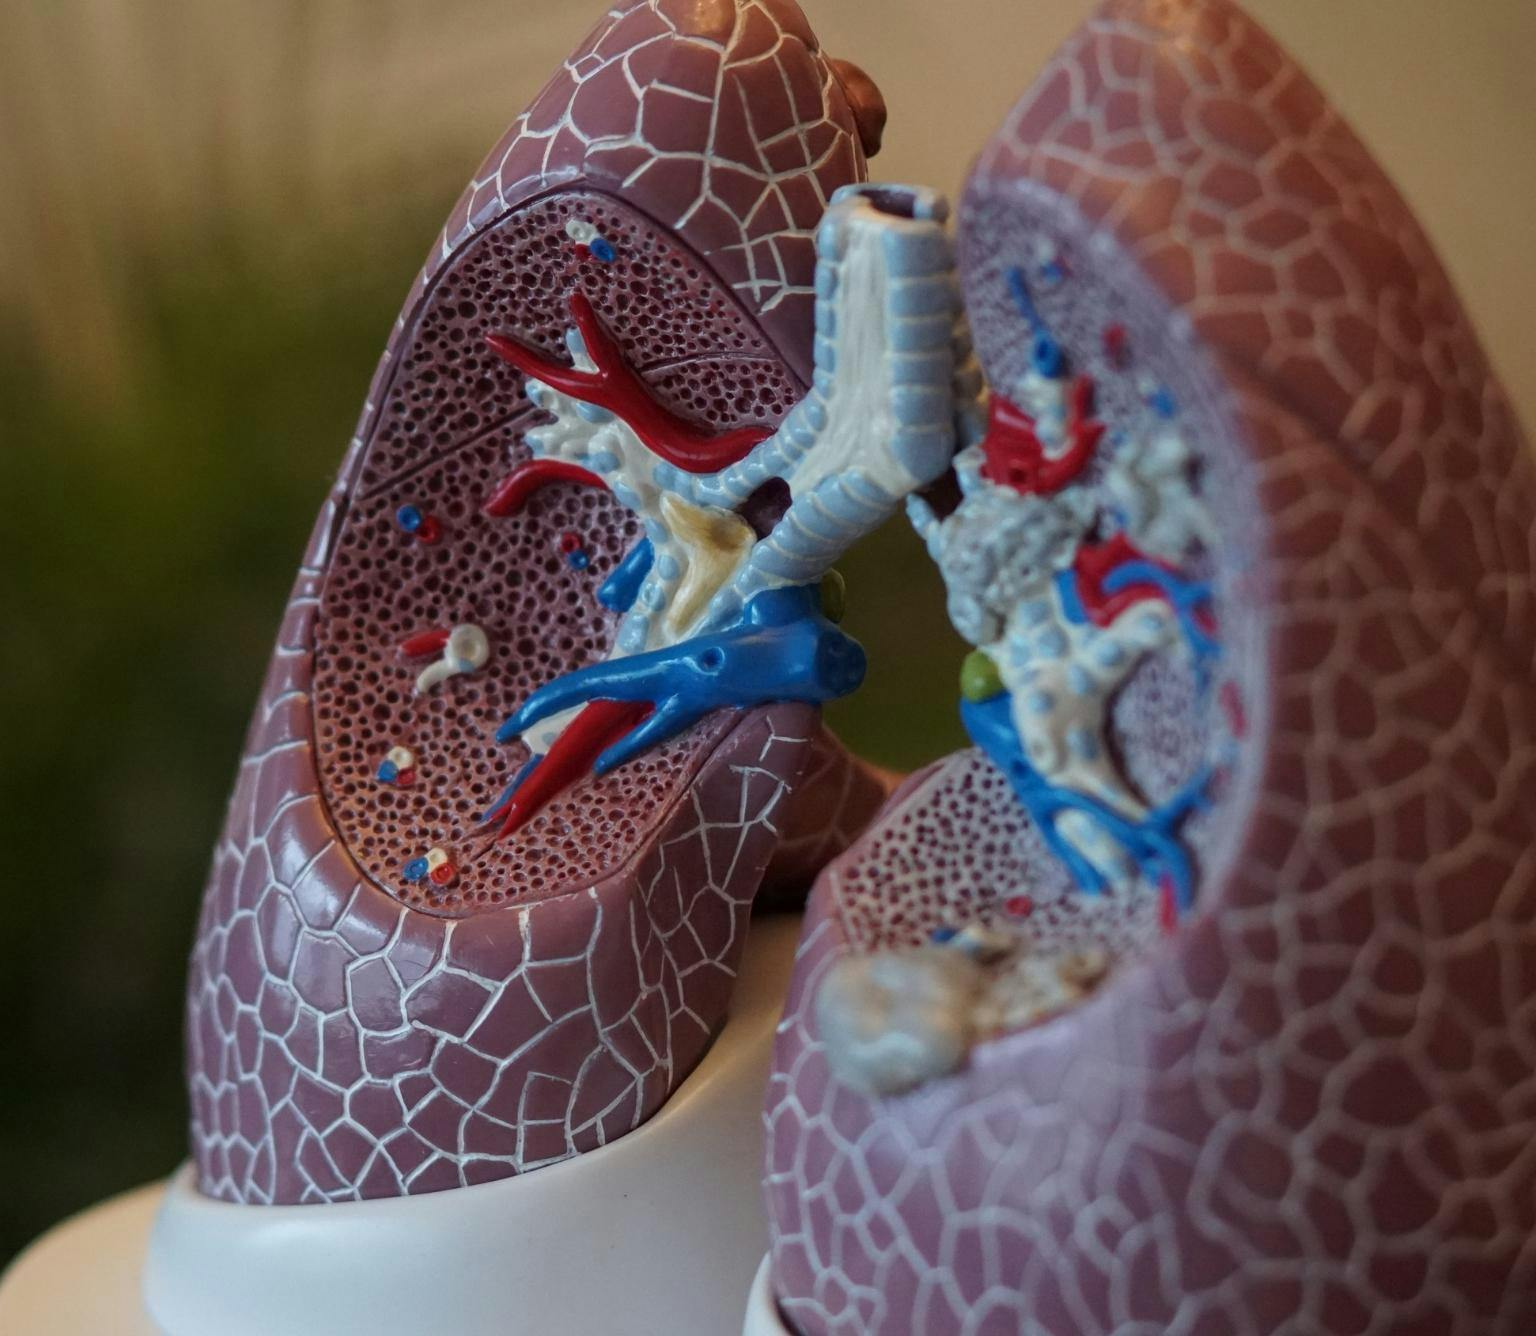 Medical model with a cross-section cutout of human lungs. The lungs are purple and have red and blue veins.